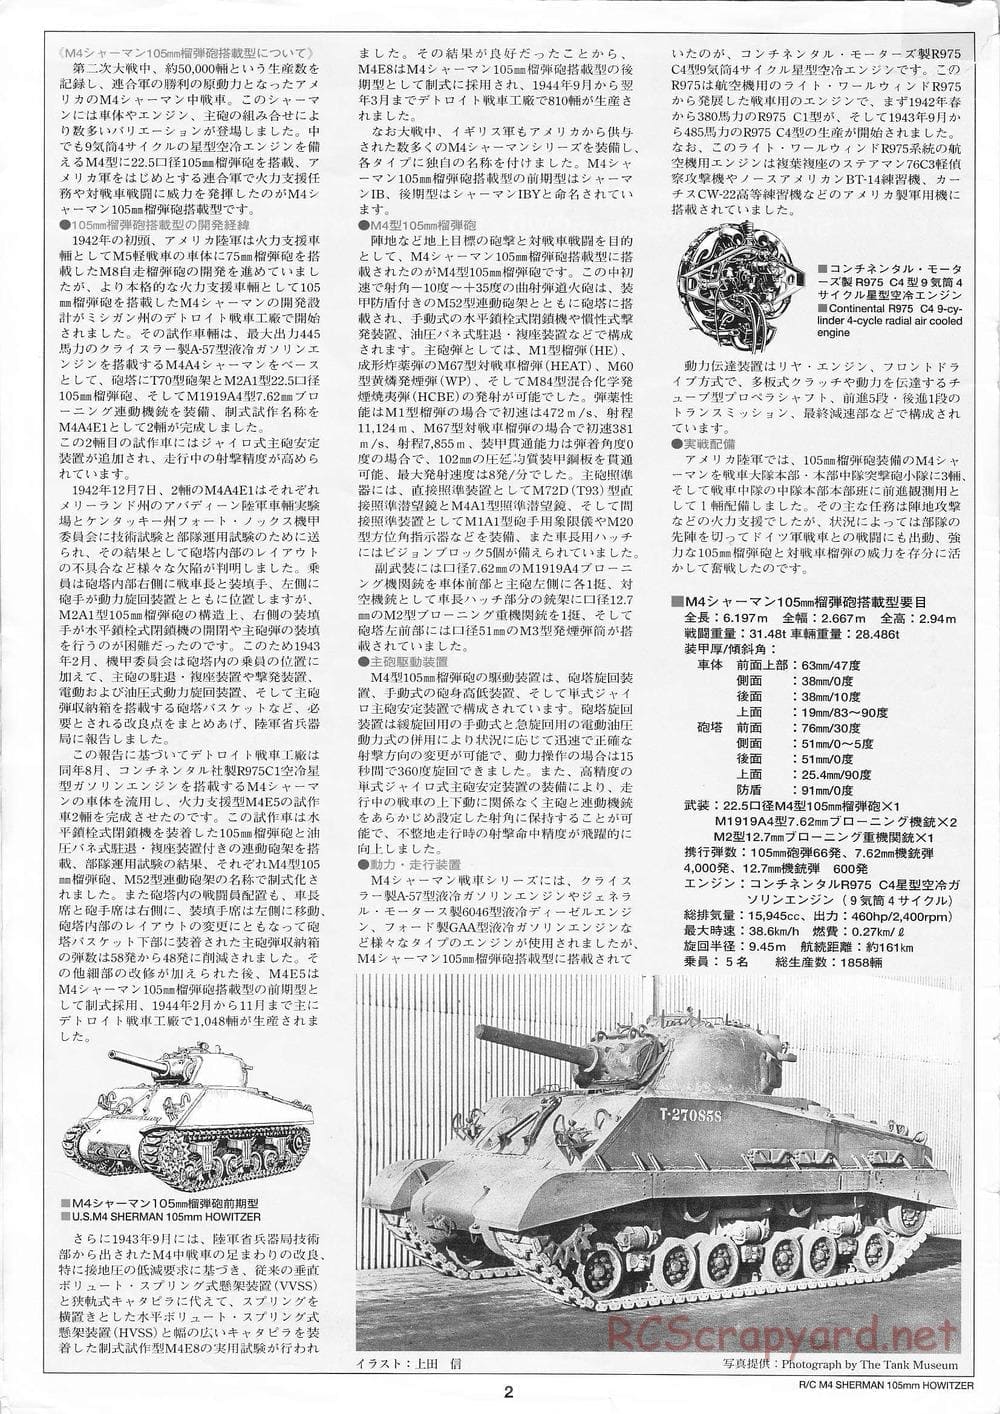 Tamiya - M4 Sherman 105mm Howitzer - 1/16 Scale Chassis - Manual - Page 2